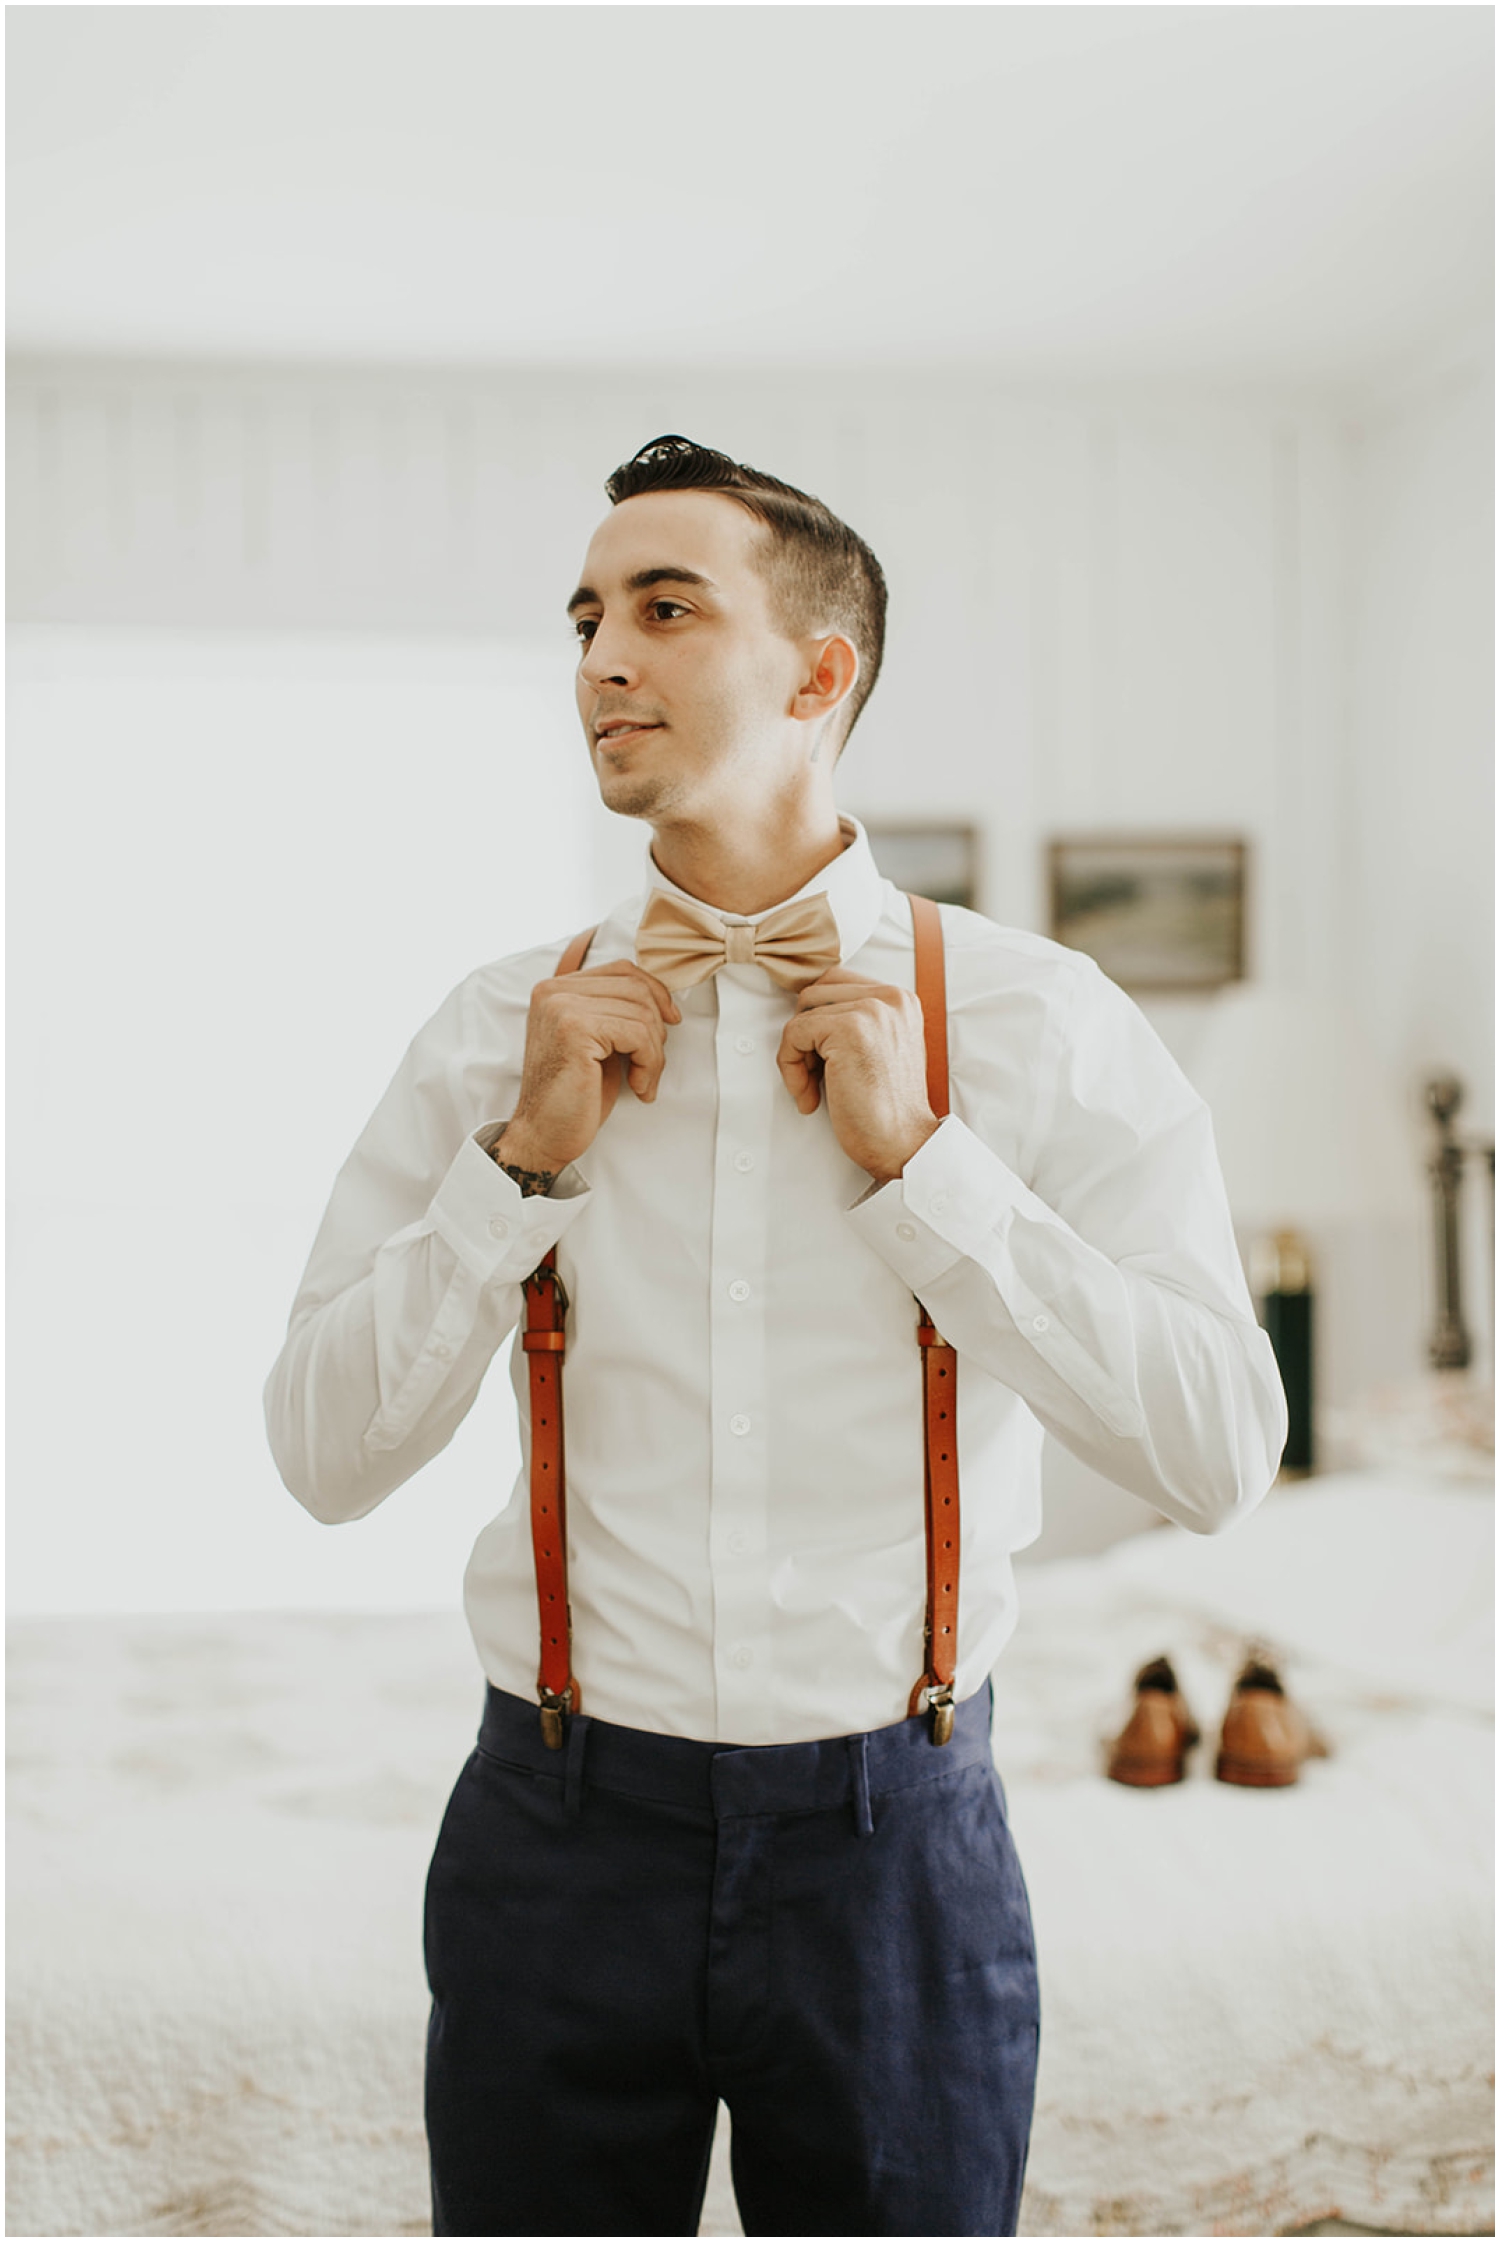  Groom getting ready for his wedding 